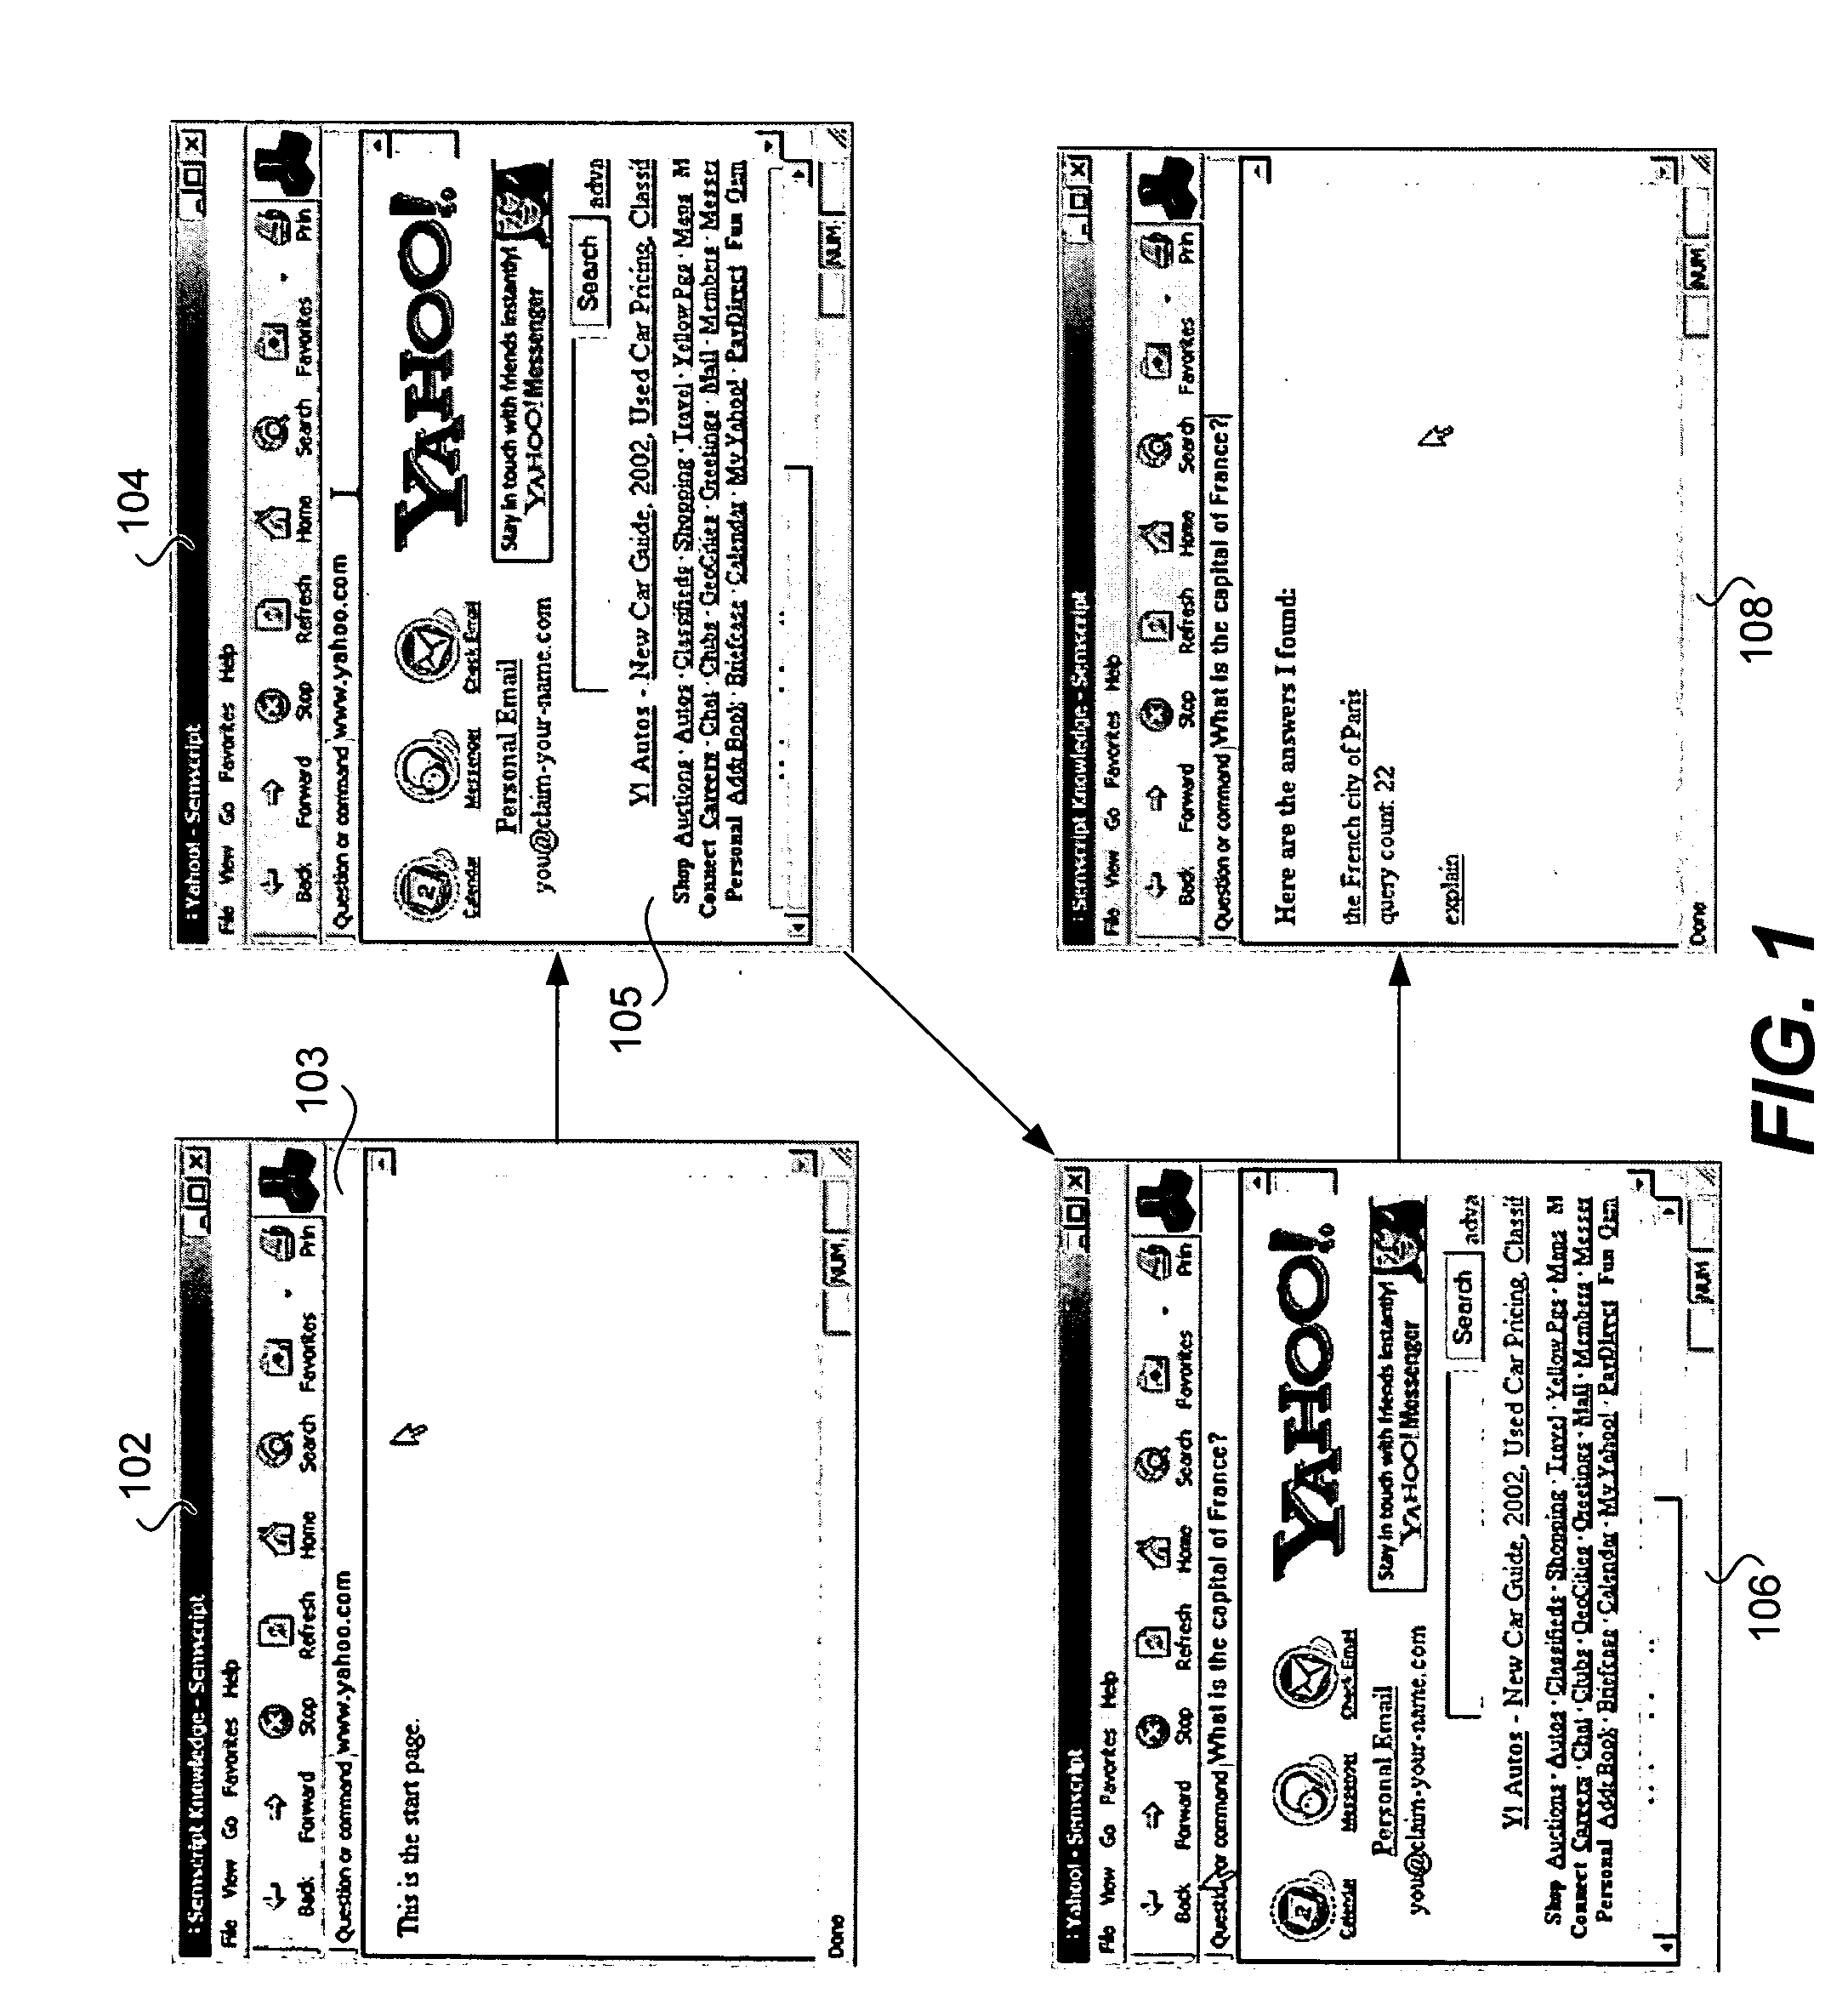 Knowledge storage and retrieval system and method